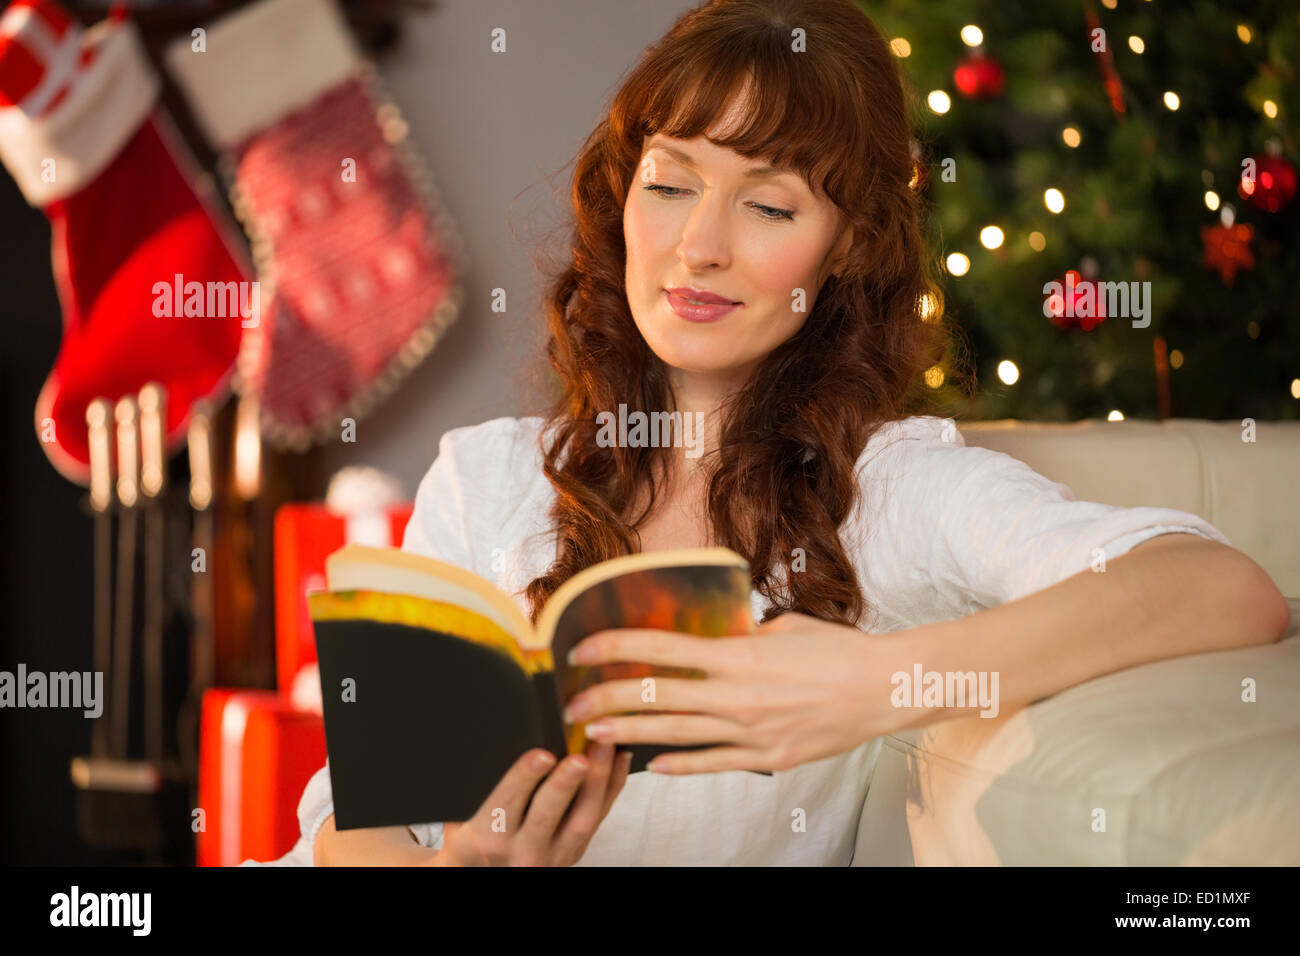 Interested redhead sitting on the floor reading Stock Photo